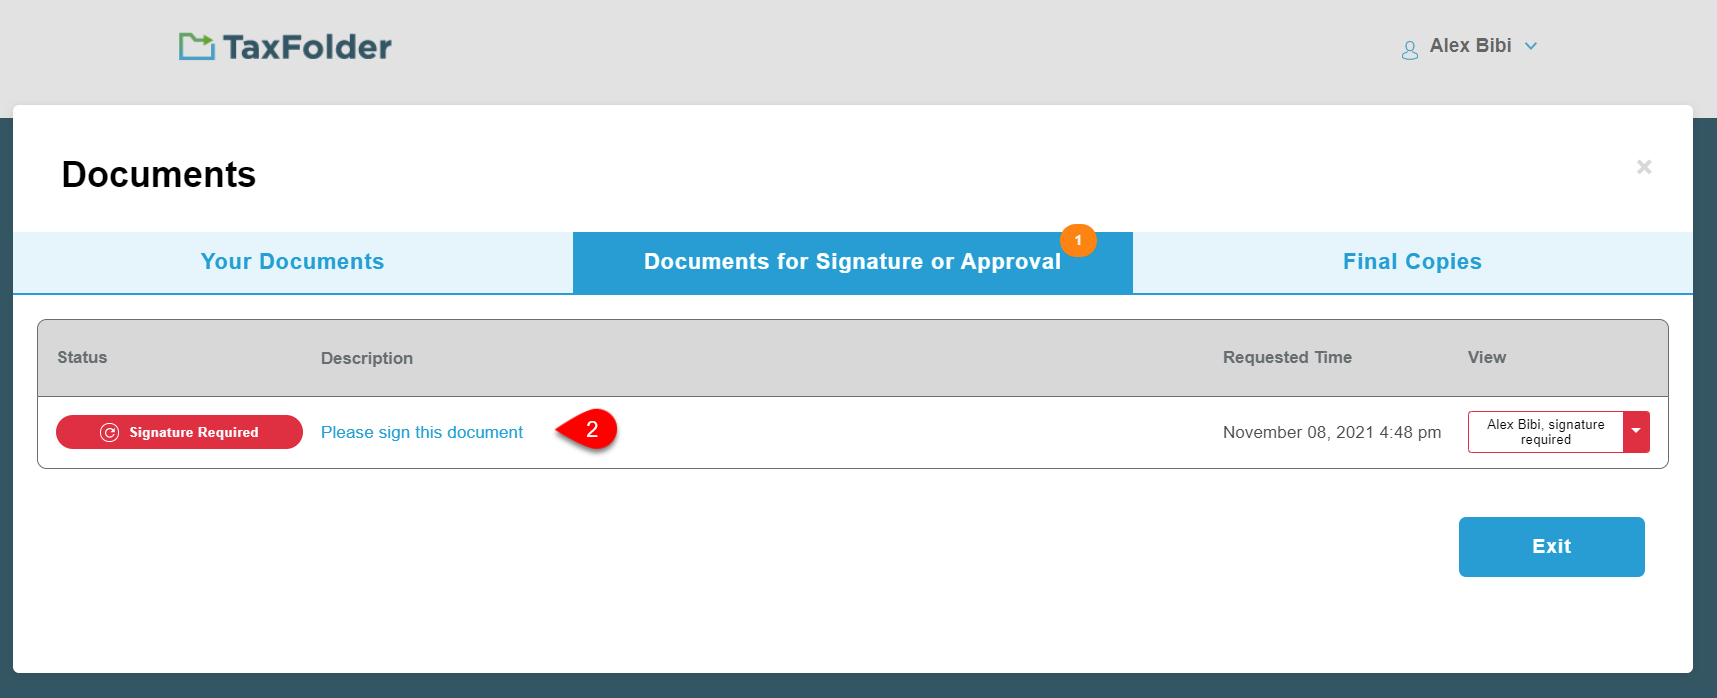 Documents for approval or signature